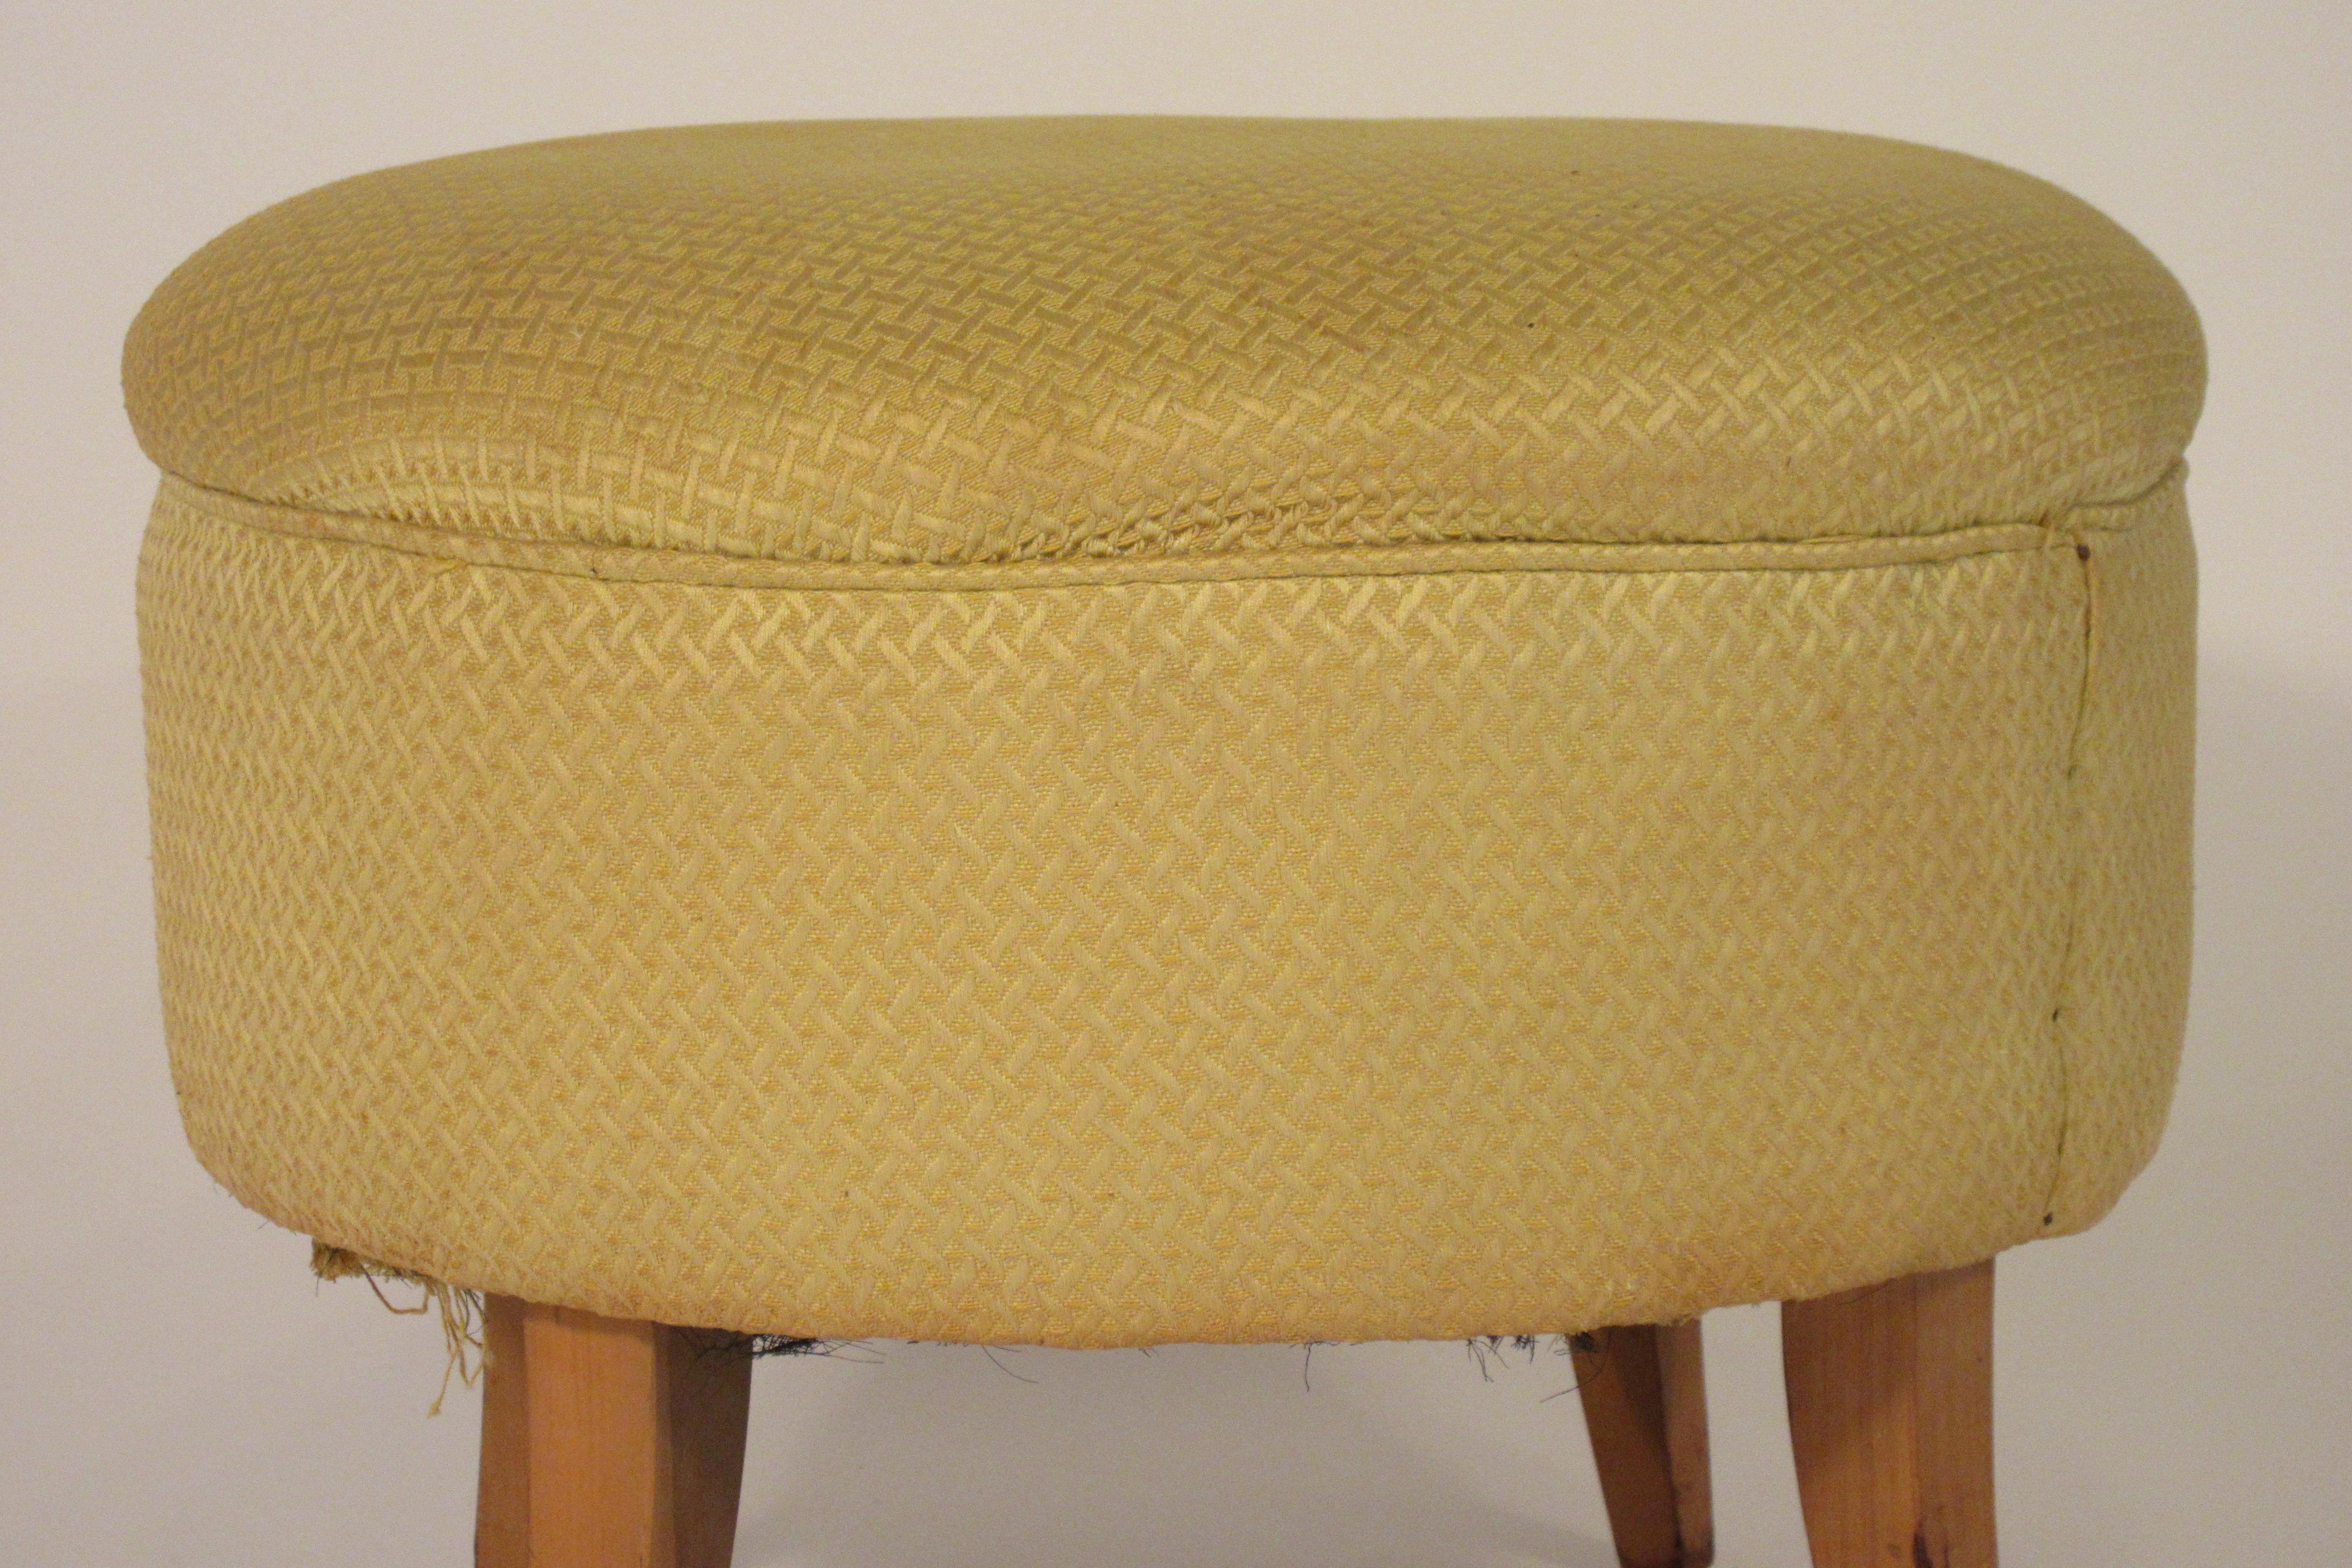 1950s Upholstered Ottoman In Good Condition For Sale In Tarrytown, NY